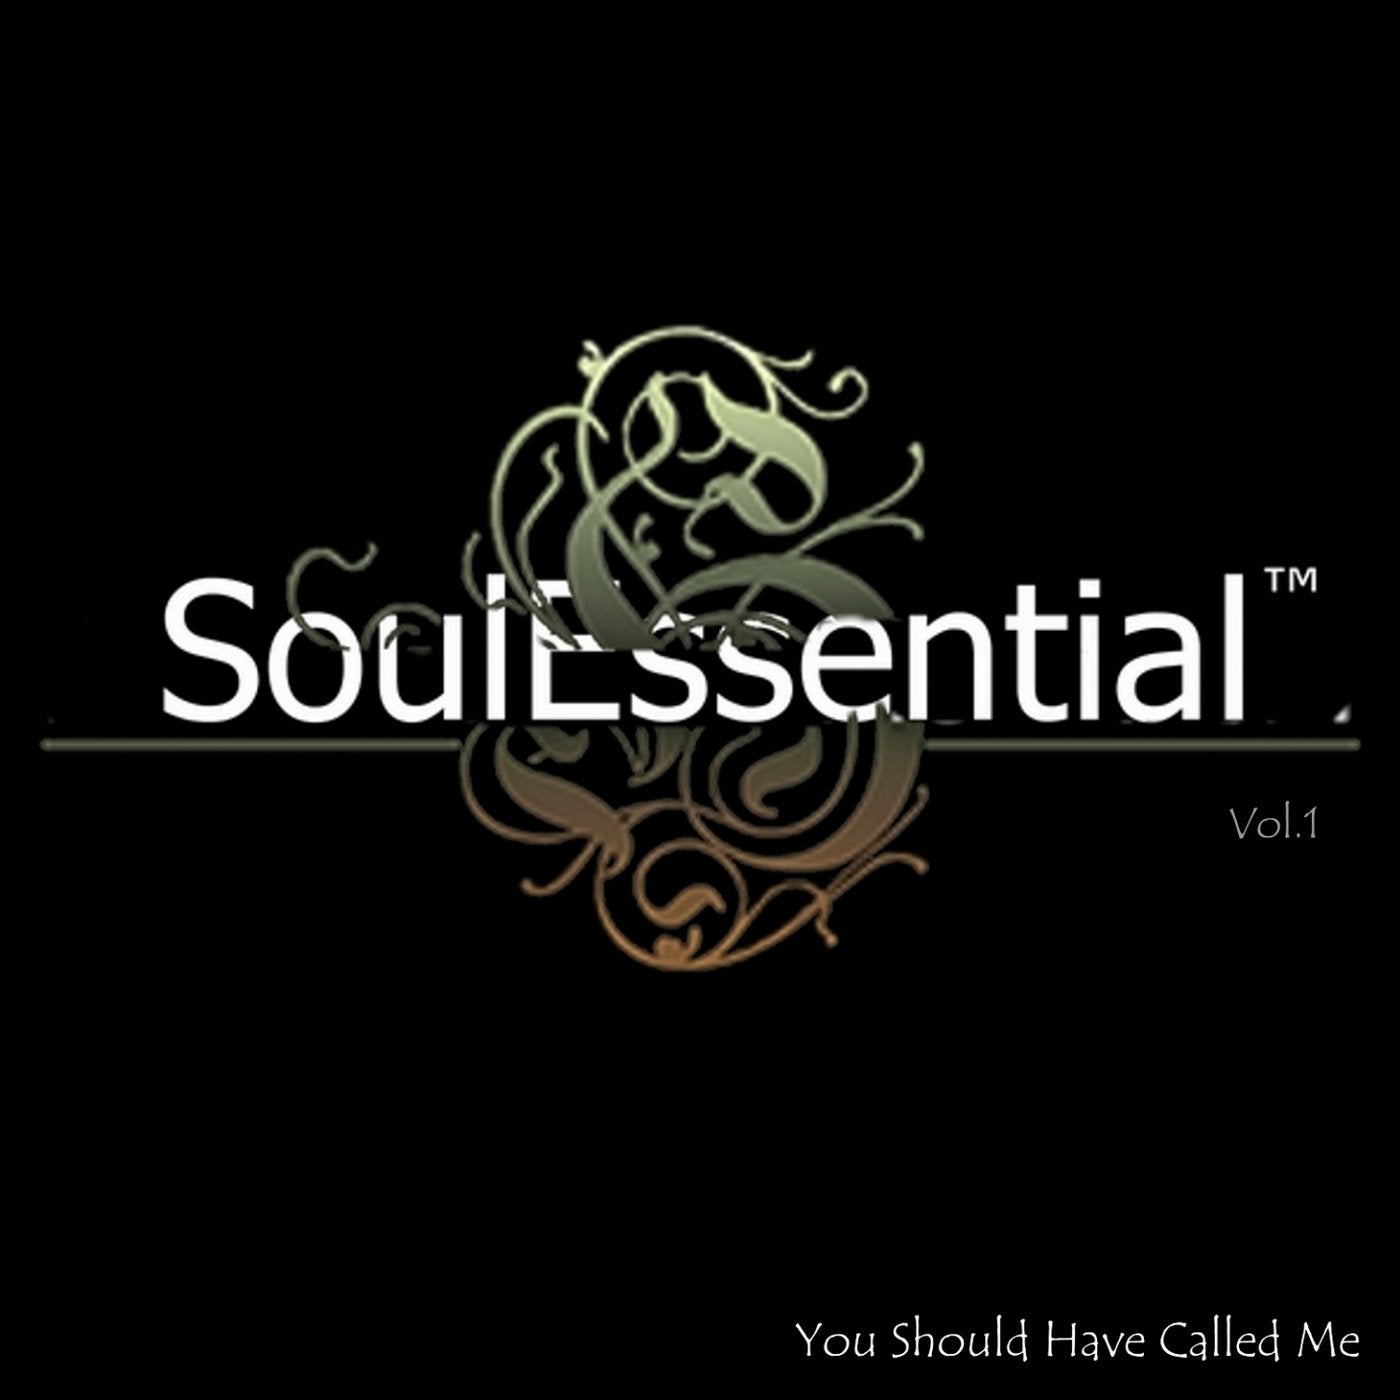 SoulEssential, Vol.1 (You Should Have Called Me)